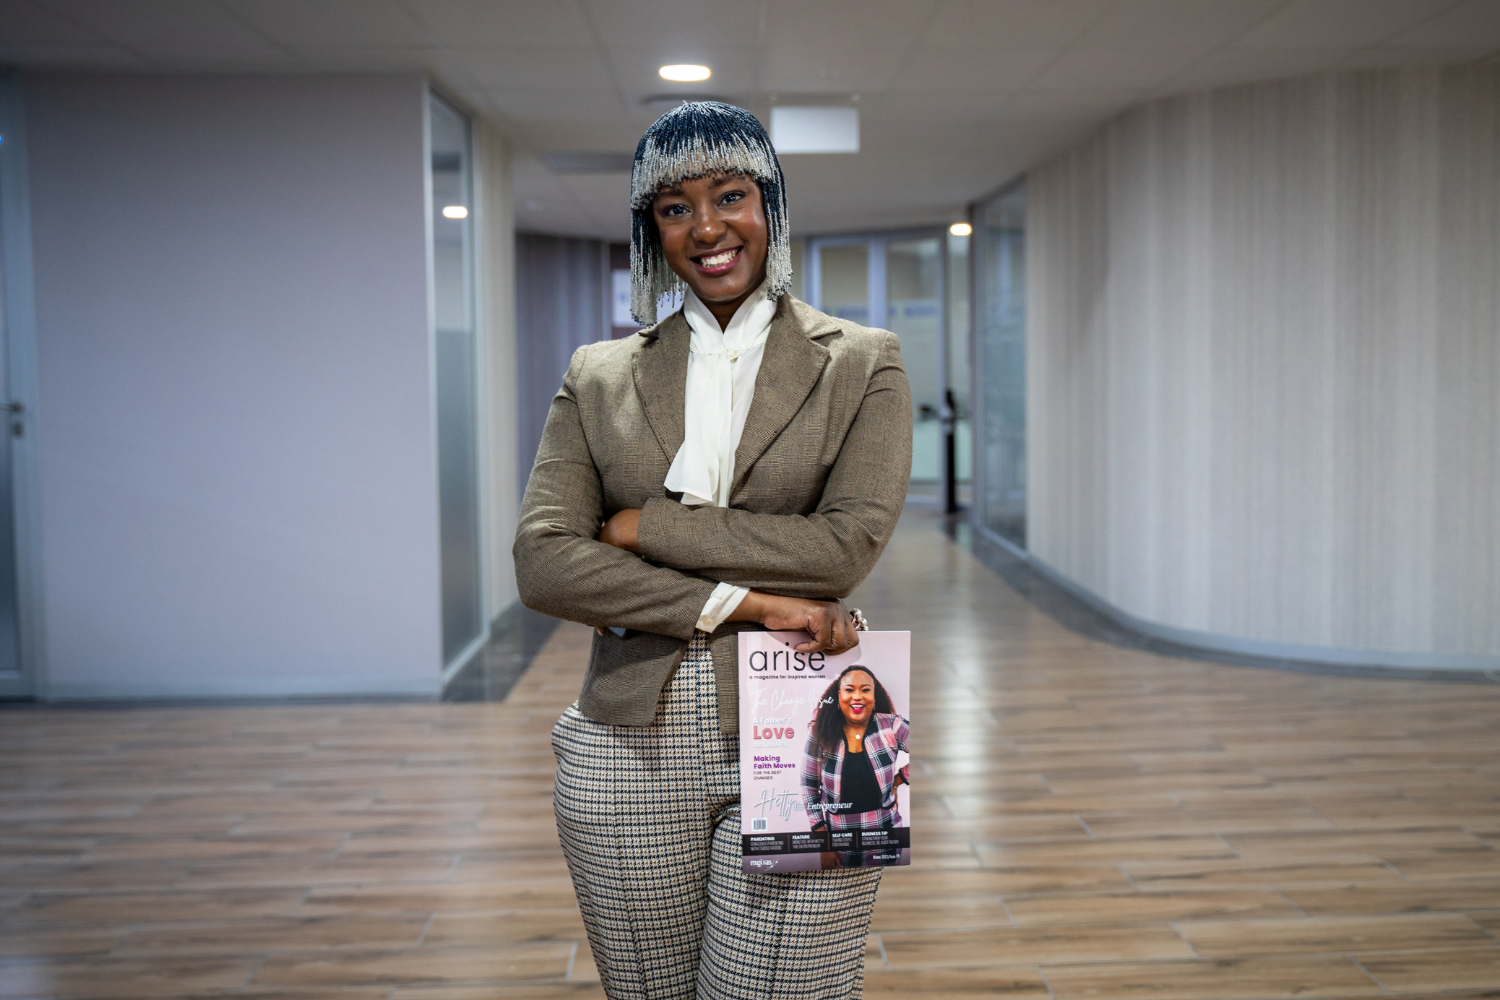 Kea Modise-Moloto, Founder of Arise in Johannesburg, South Africa poses with her magazine in the hallway of her business.